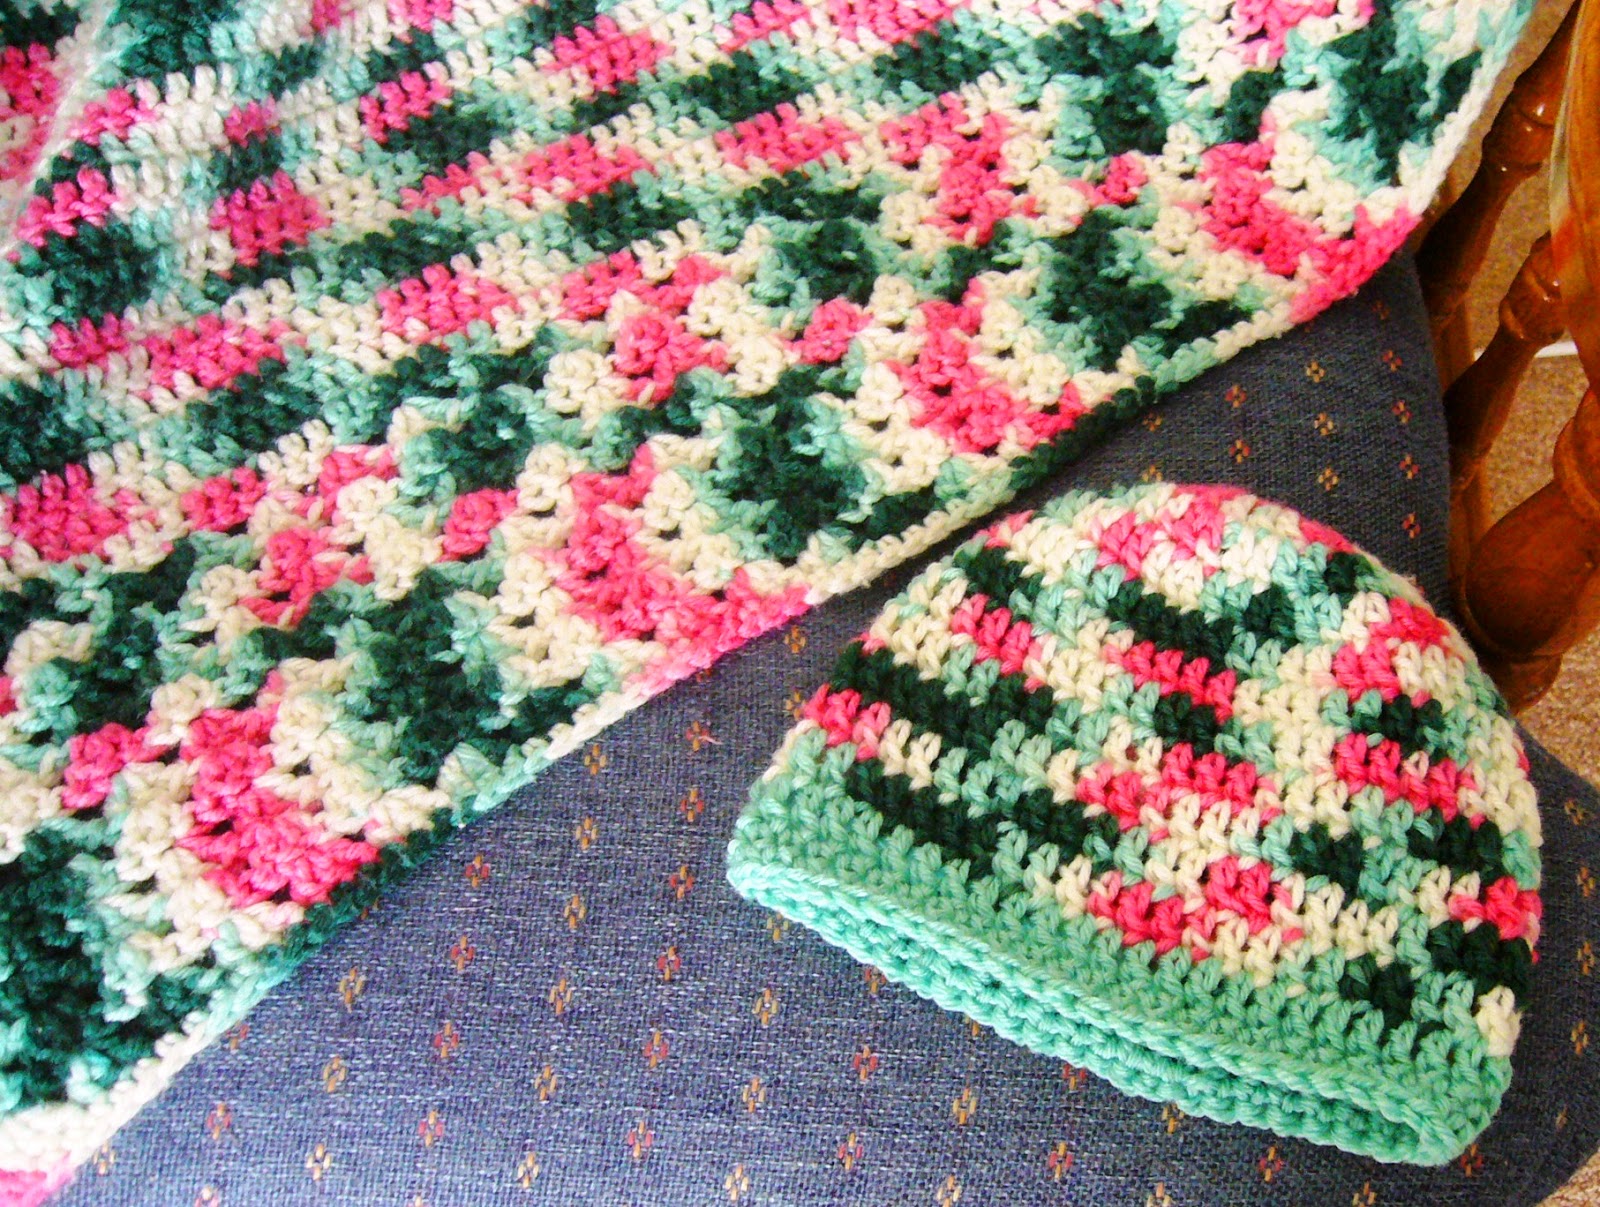 Crocheting for Operation Christmas Child Shoe Boxes